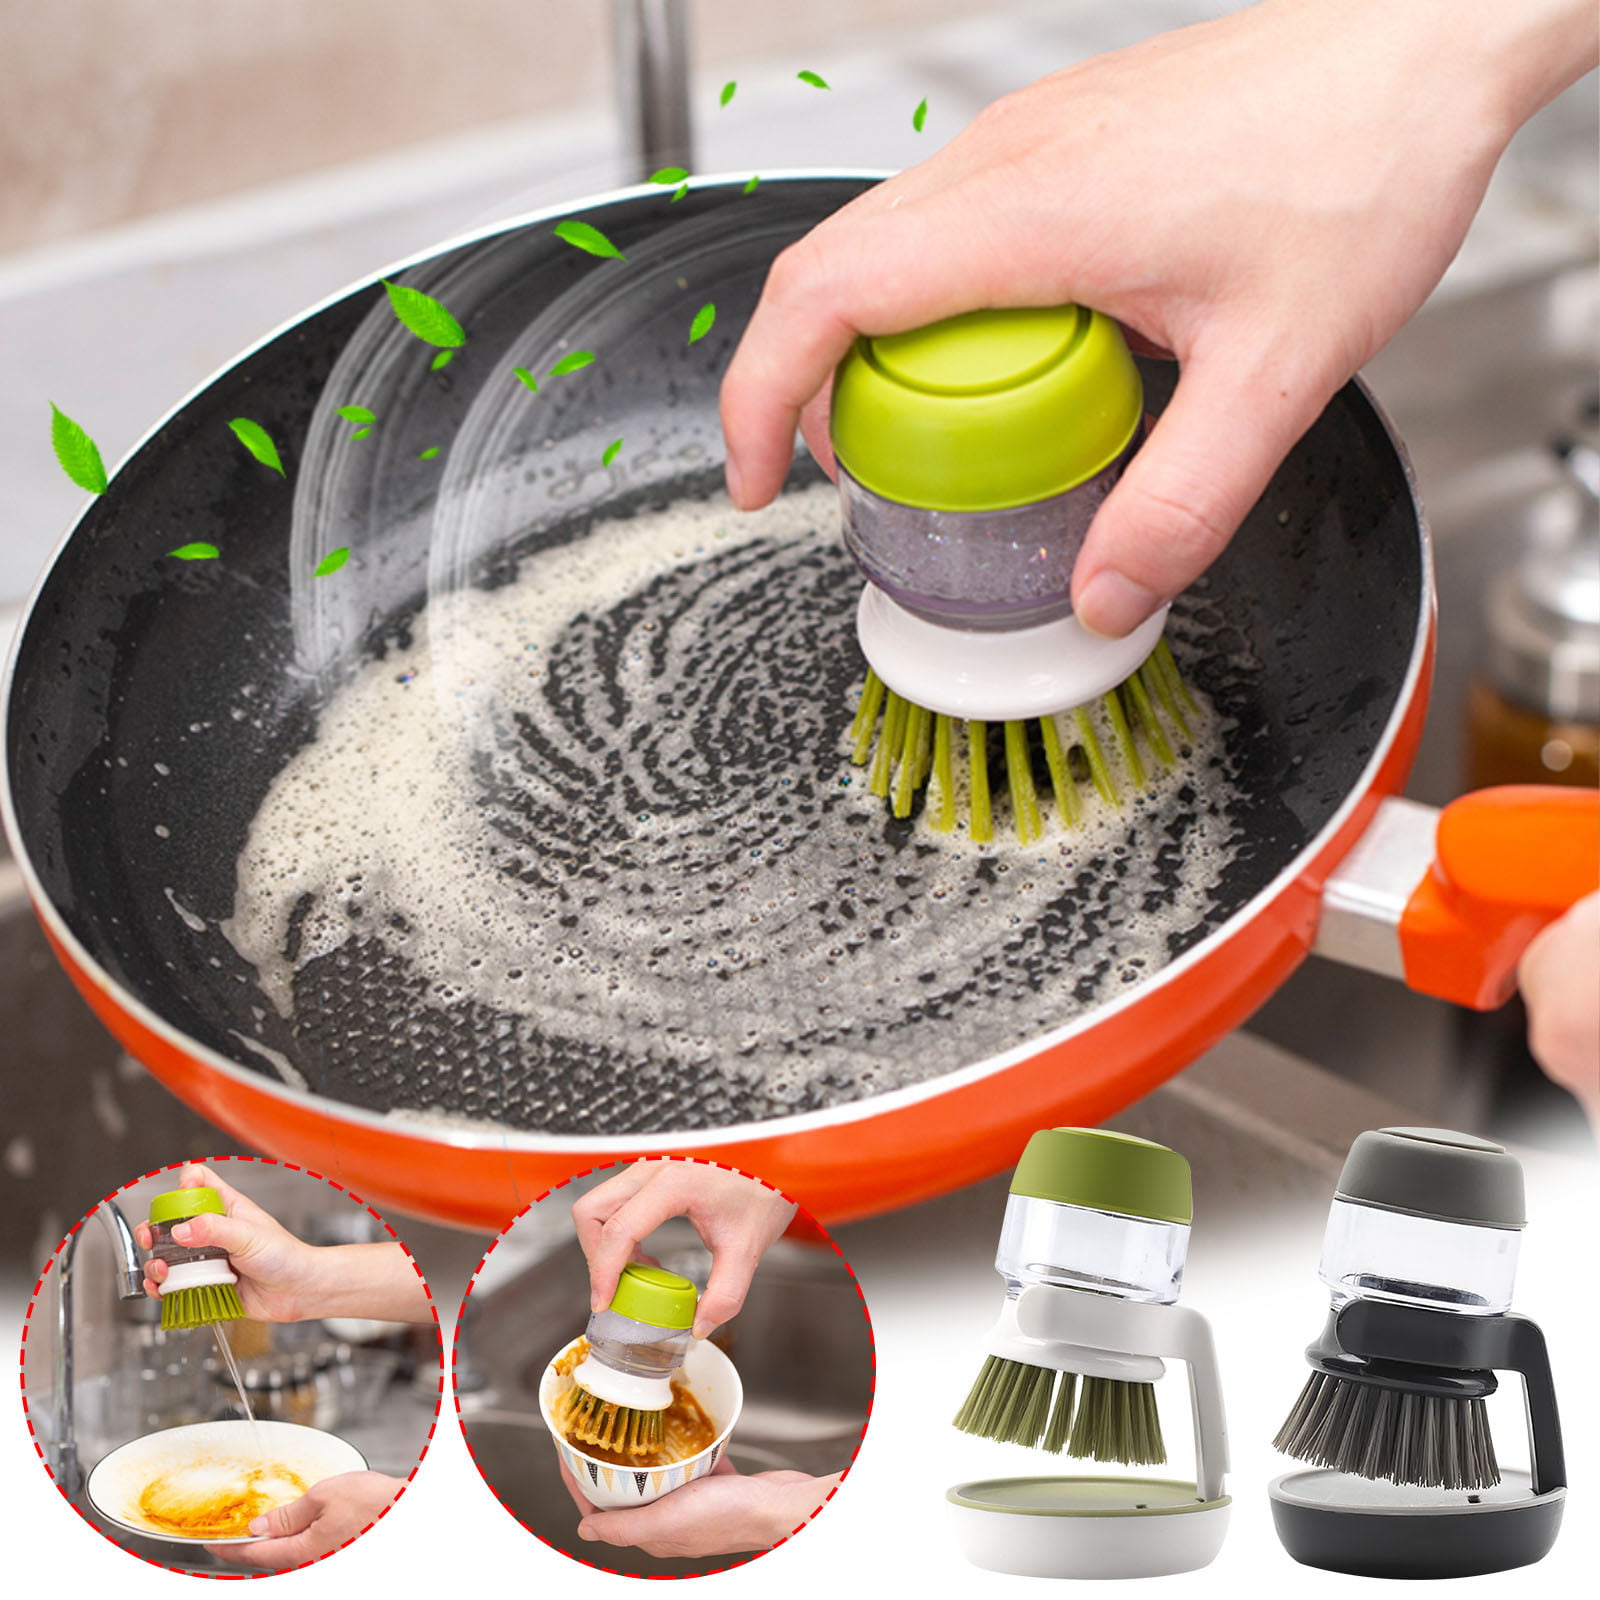 DAPOWER Dish Brush with Handle, Dish Scrubber with Soap Dispenser, Kitchen  Scrub Brush for Dishes Pots Pans Sink Cleaning, 4 Replaceable Brush Heads